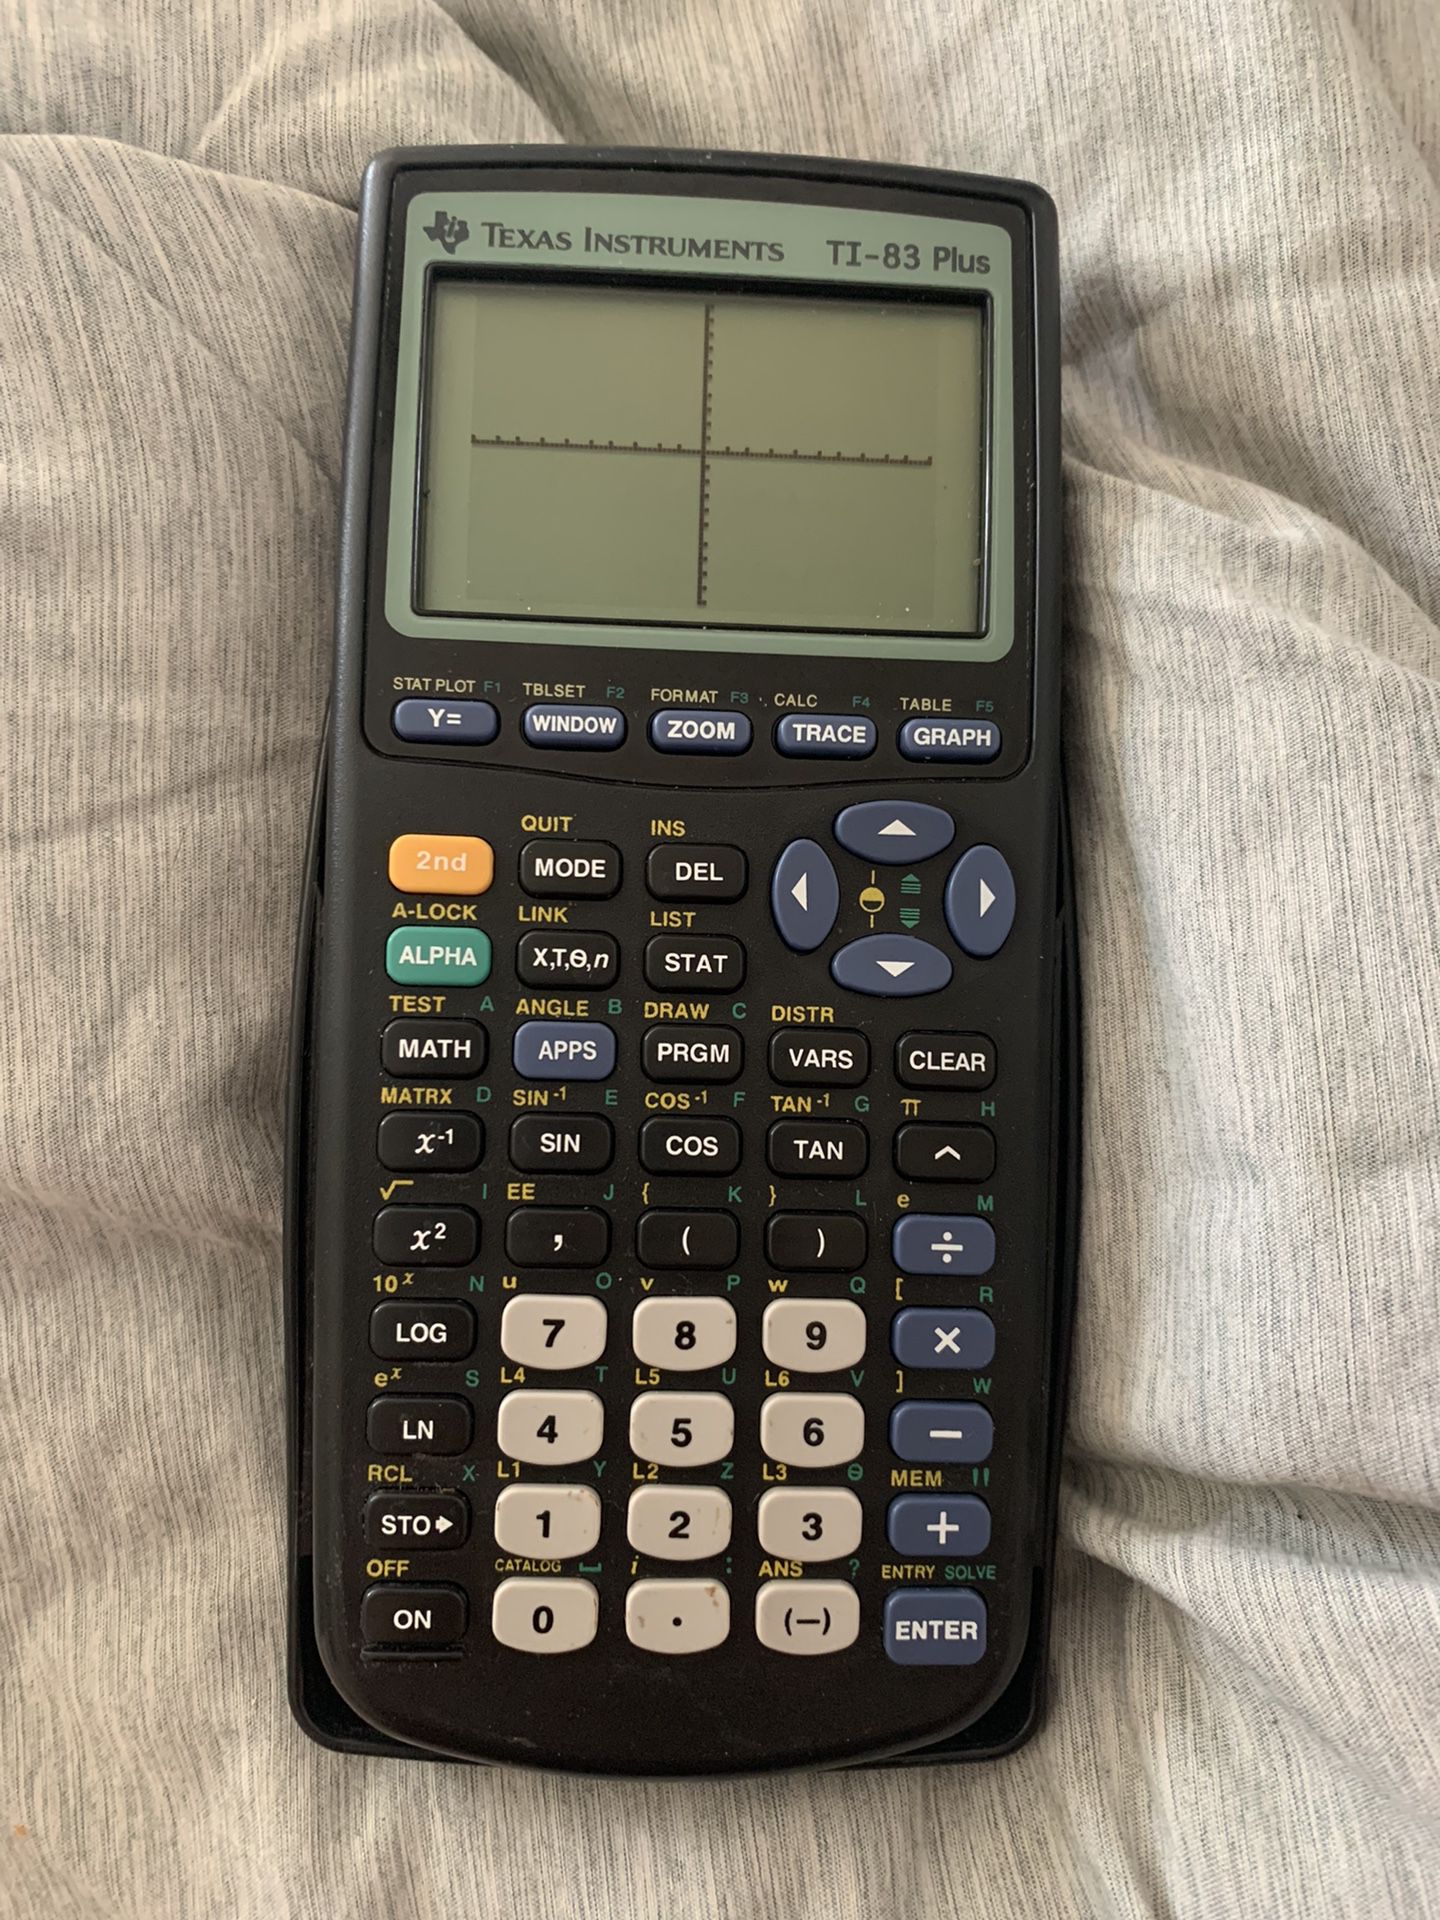 Graphing Calculator 